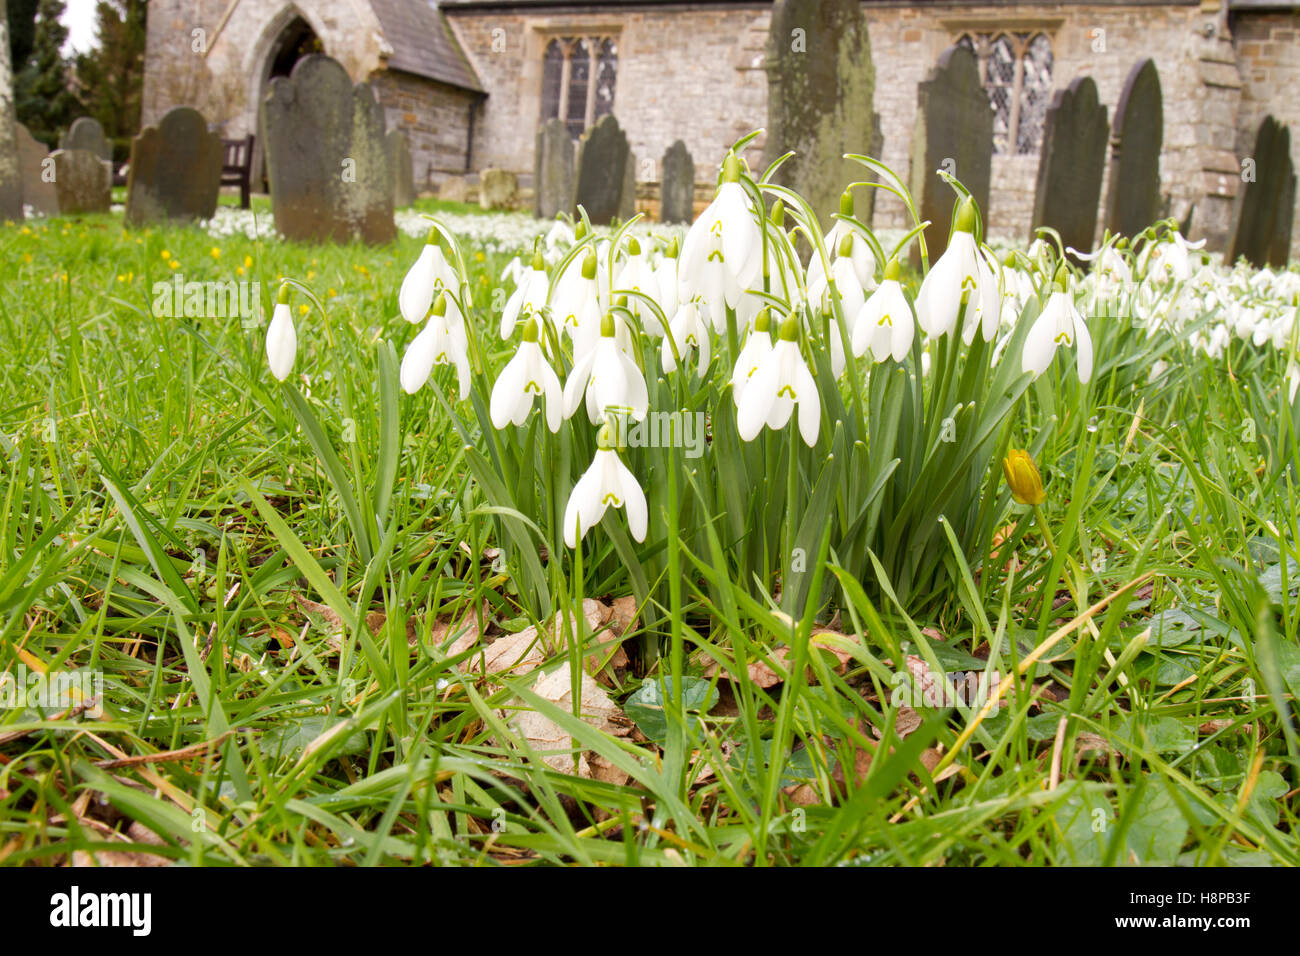 Snowdrops (Galanthus nivalis) flowering . Naturalized in a churchyard. Powys, Wales. February. Stock Photo